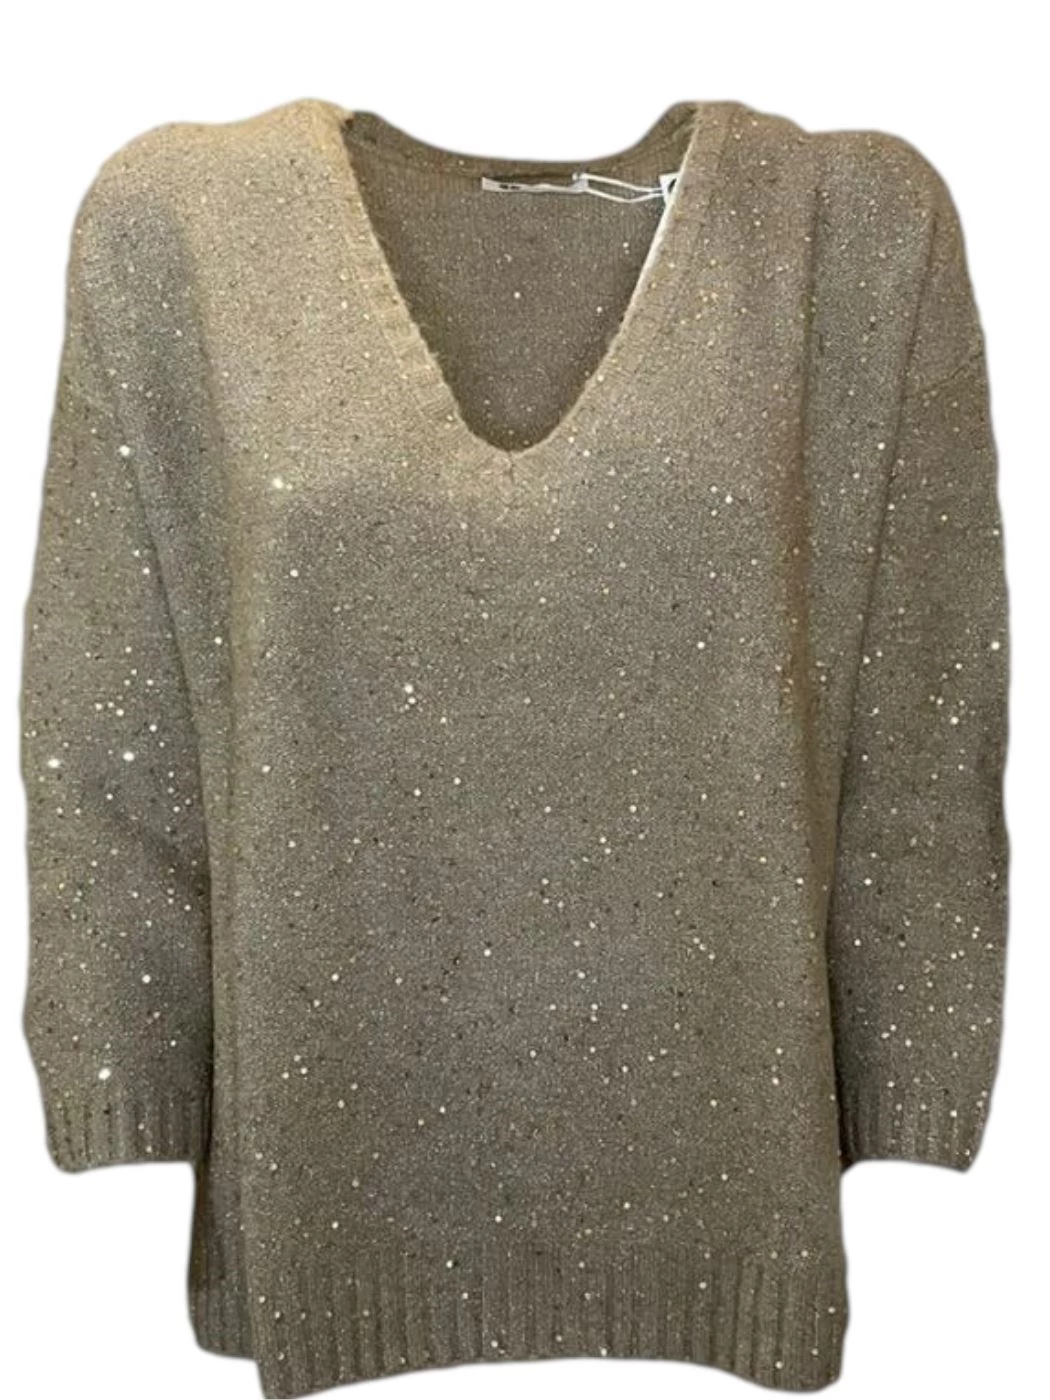 Diana Gallesi pullover sweater whit sequins